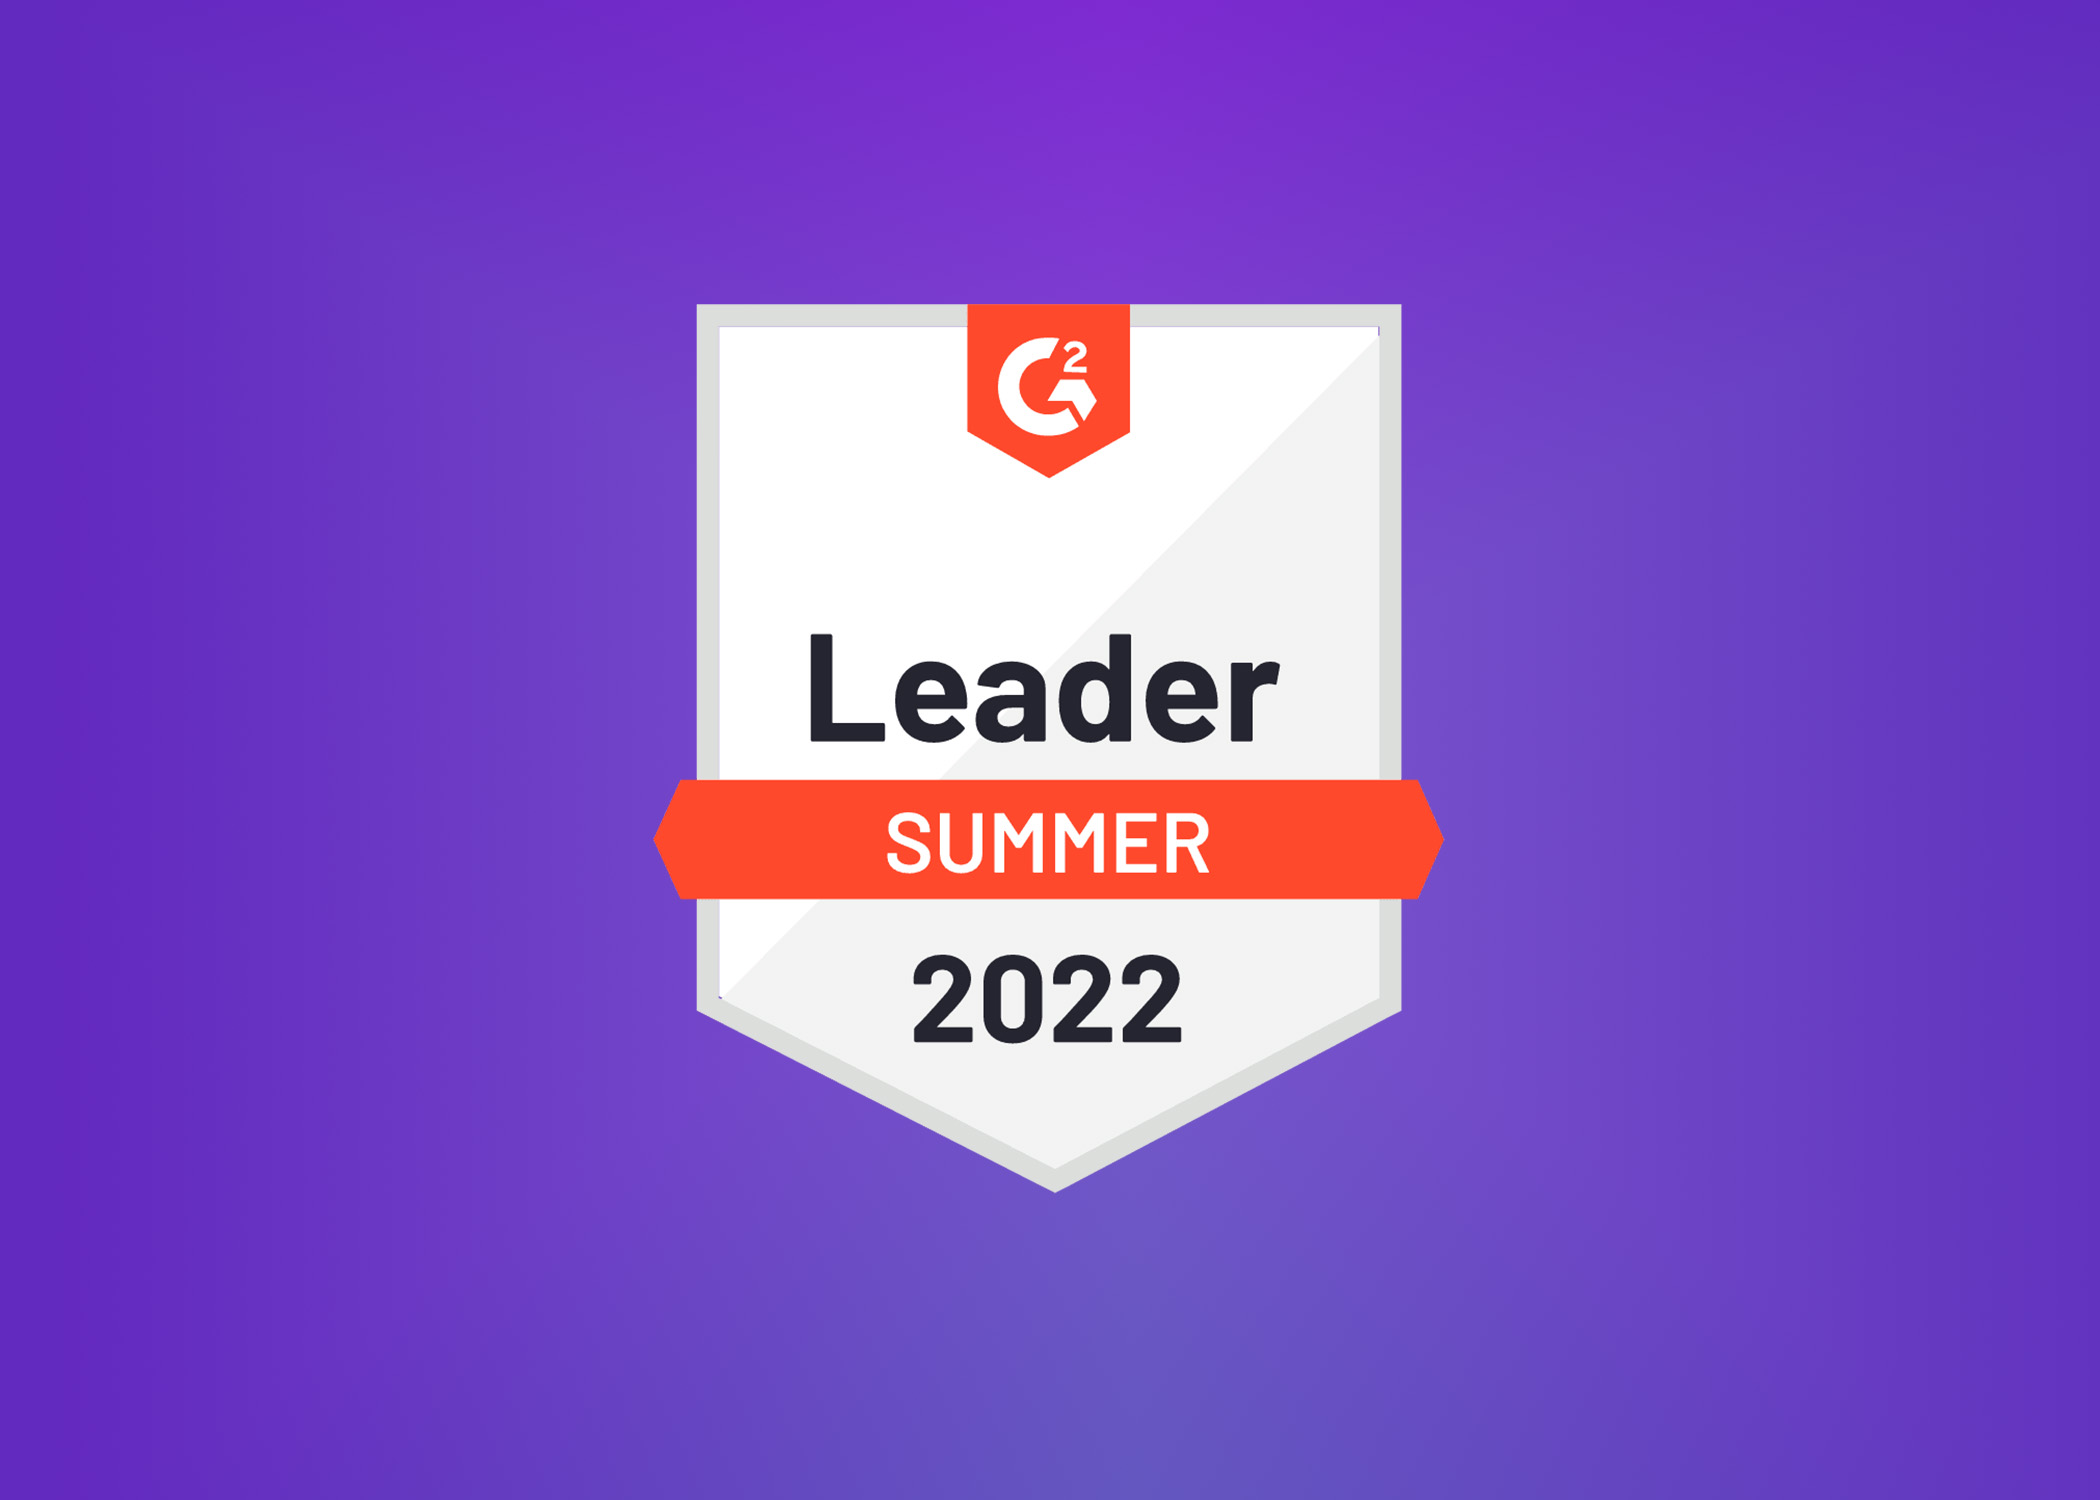 G2 ranks Silo as an industry Leader for Summer 2022